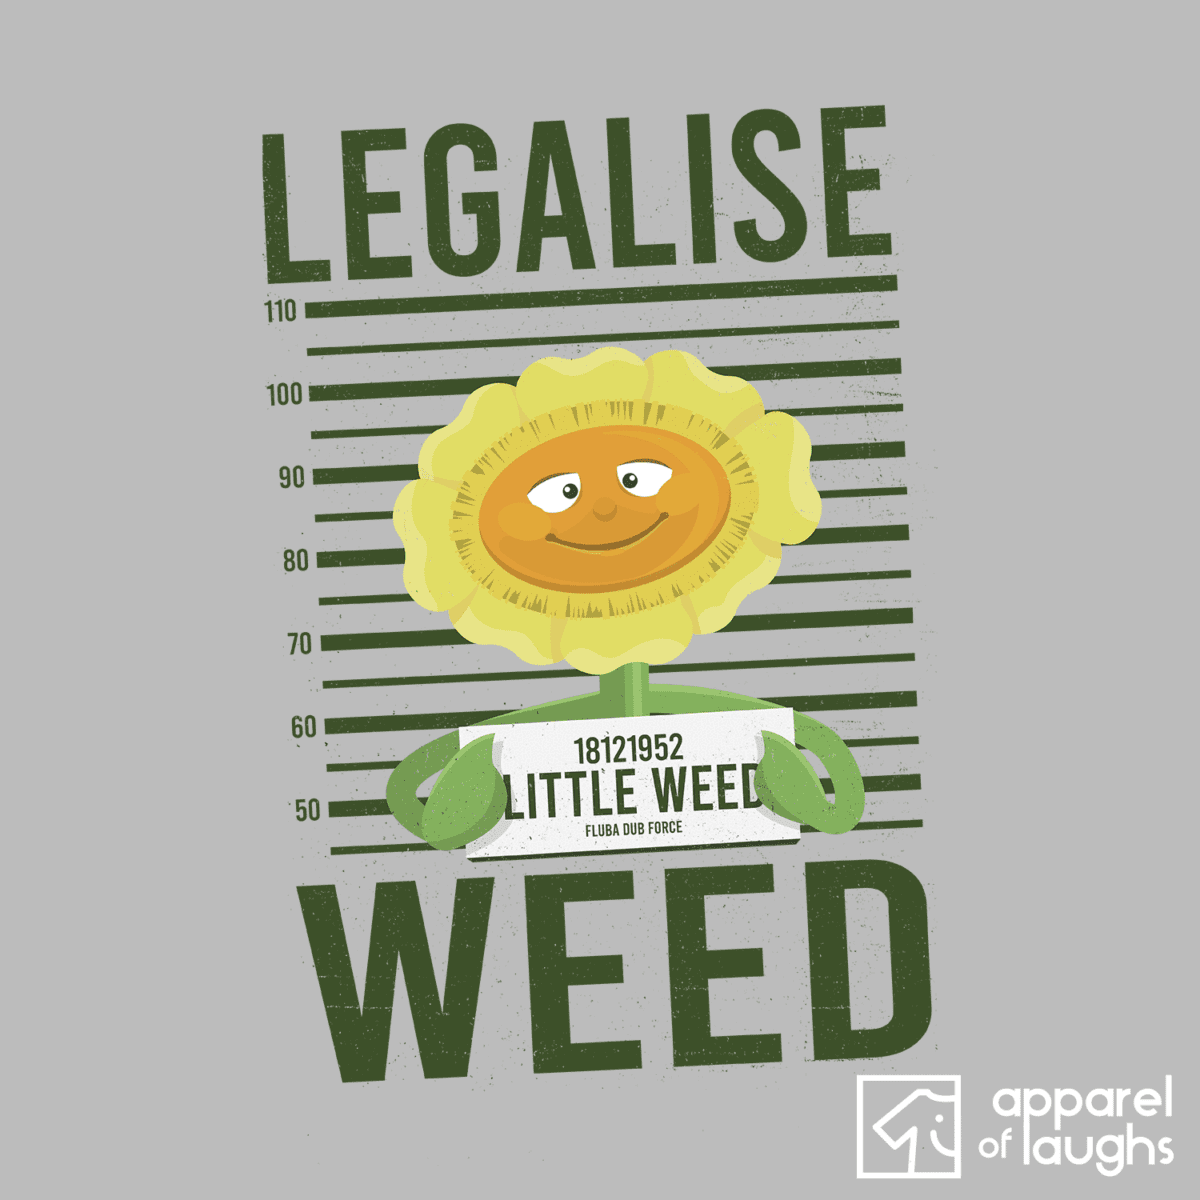 Legalise Weed Bill and Ben Little Weed British TV Cbeebies T-Shirt Design Sports Grey